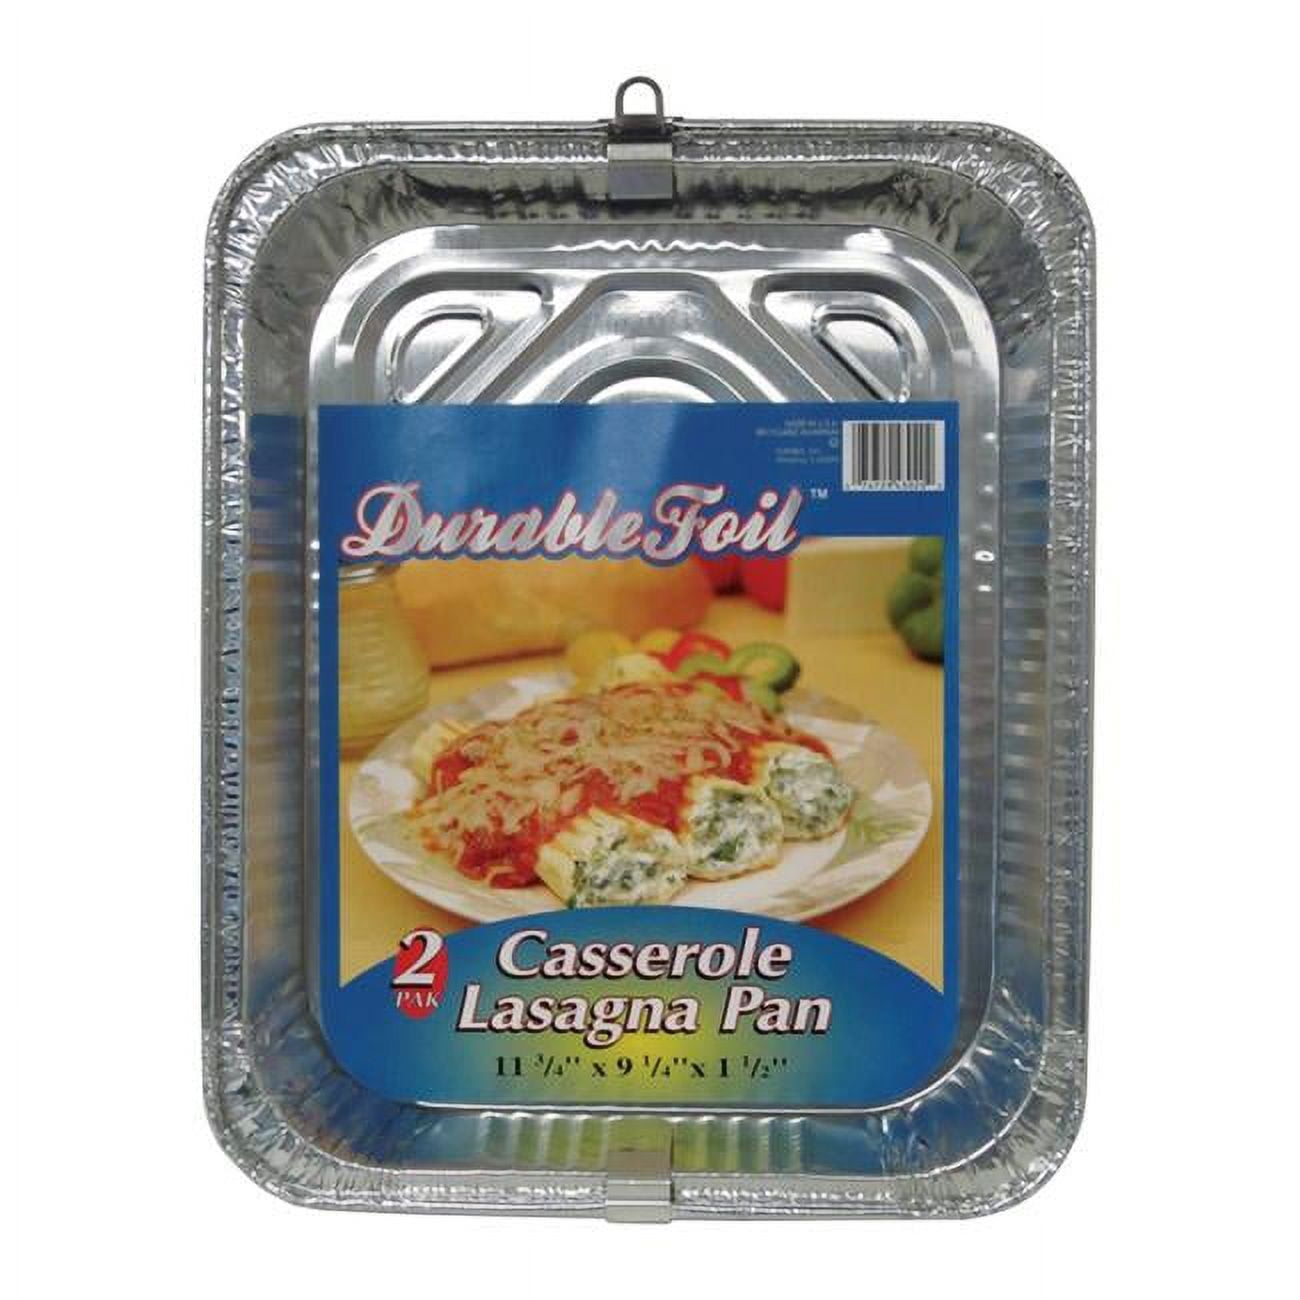 Picture of Home Plus 6392039 9.25 x 11.75 in. Durable Foil Casserole Lasagna Pan - Silver- pack of 12